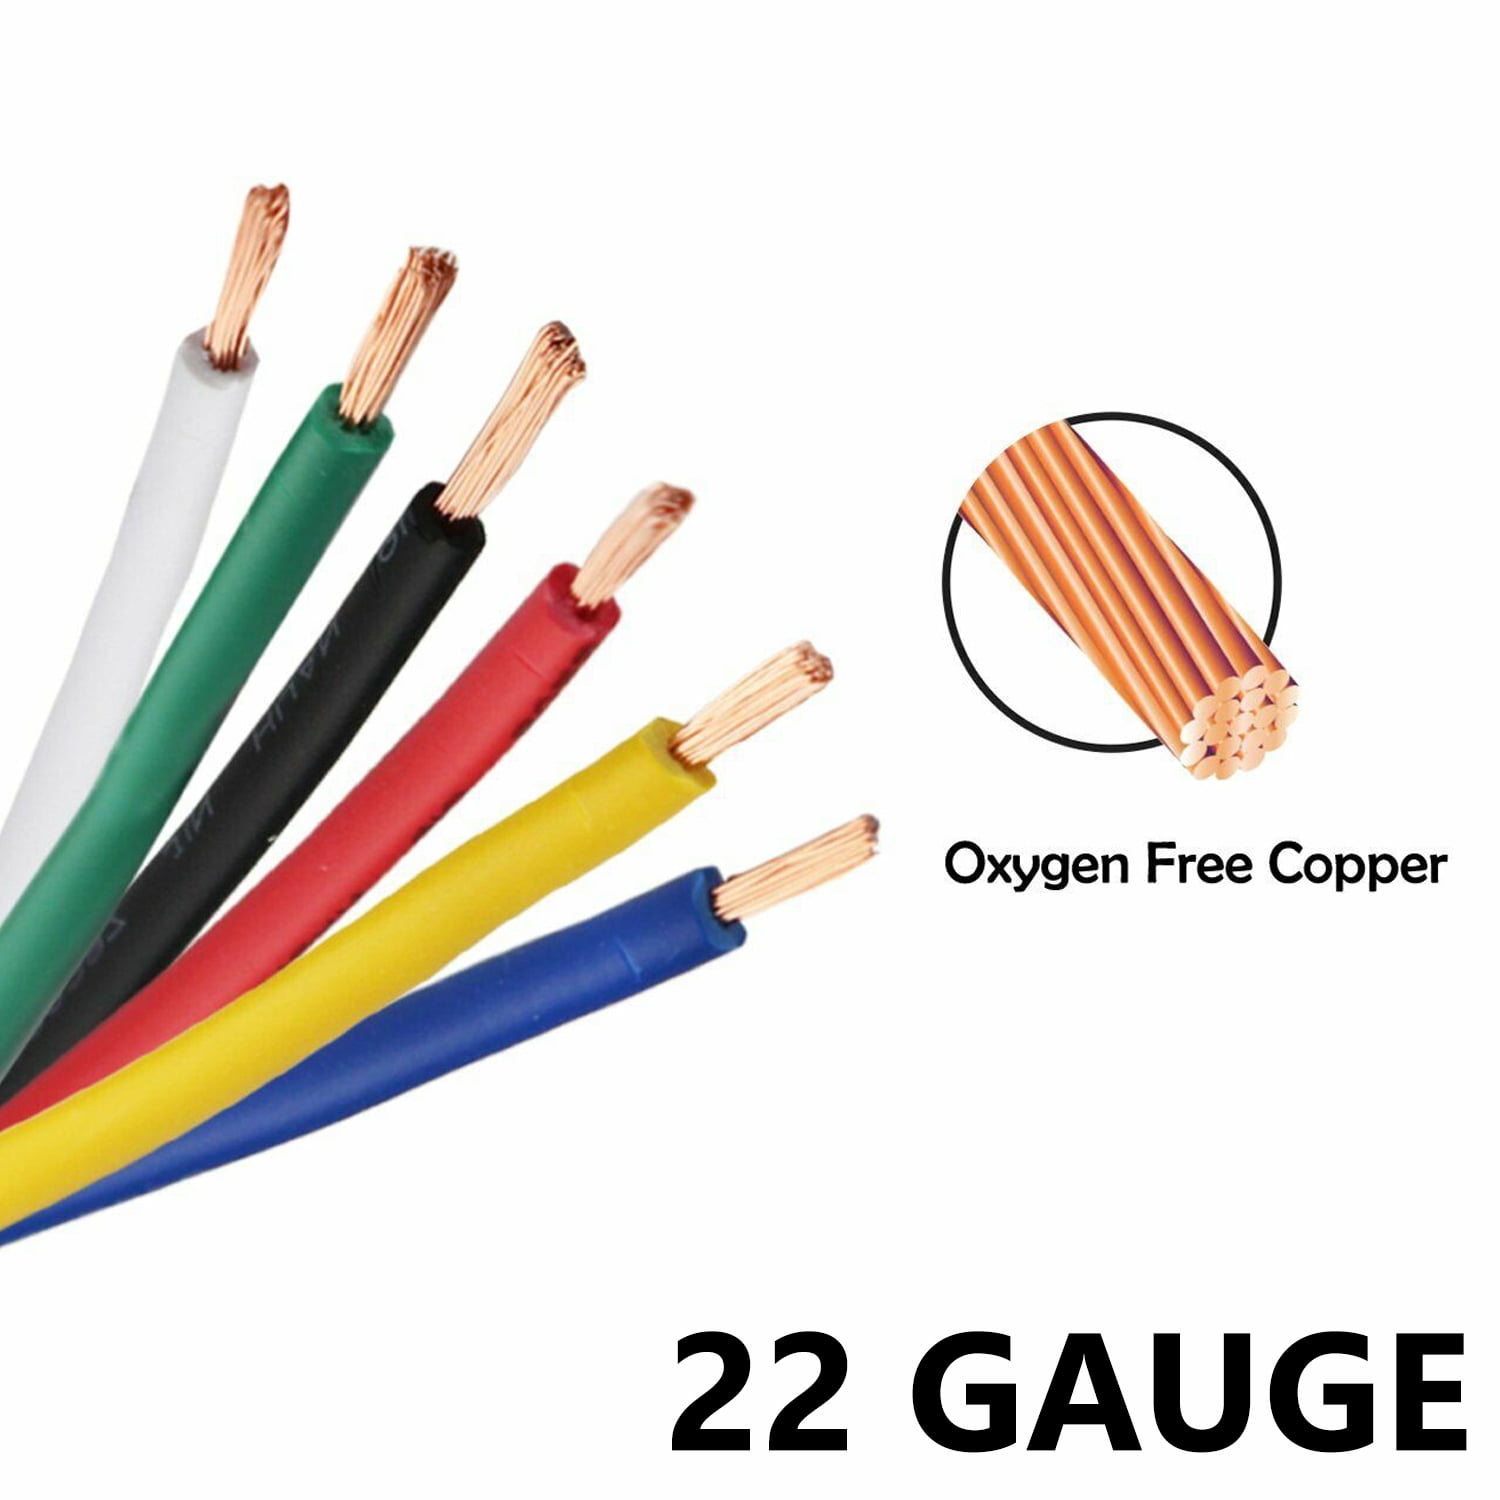 16 GAUGE WIRE 10 COLORS 10 FT EA PRIMARY AWG STRANDED COPPER POWER REMOTE CABLE 